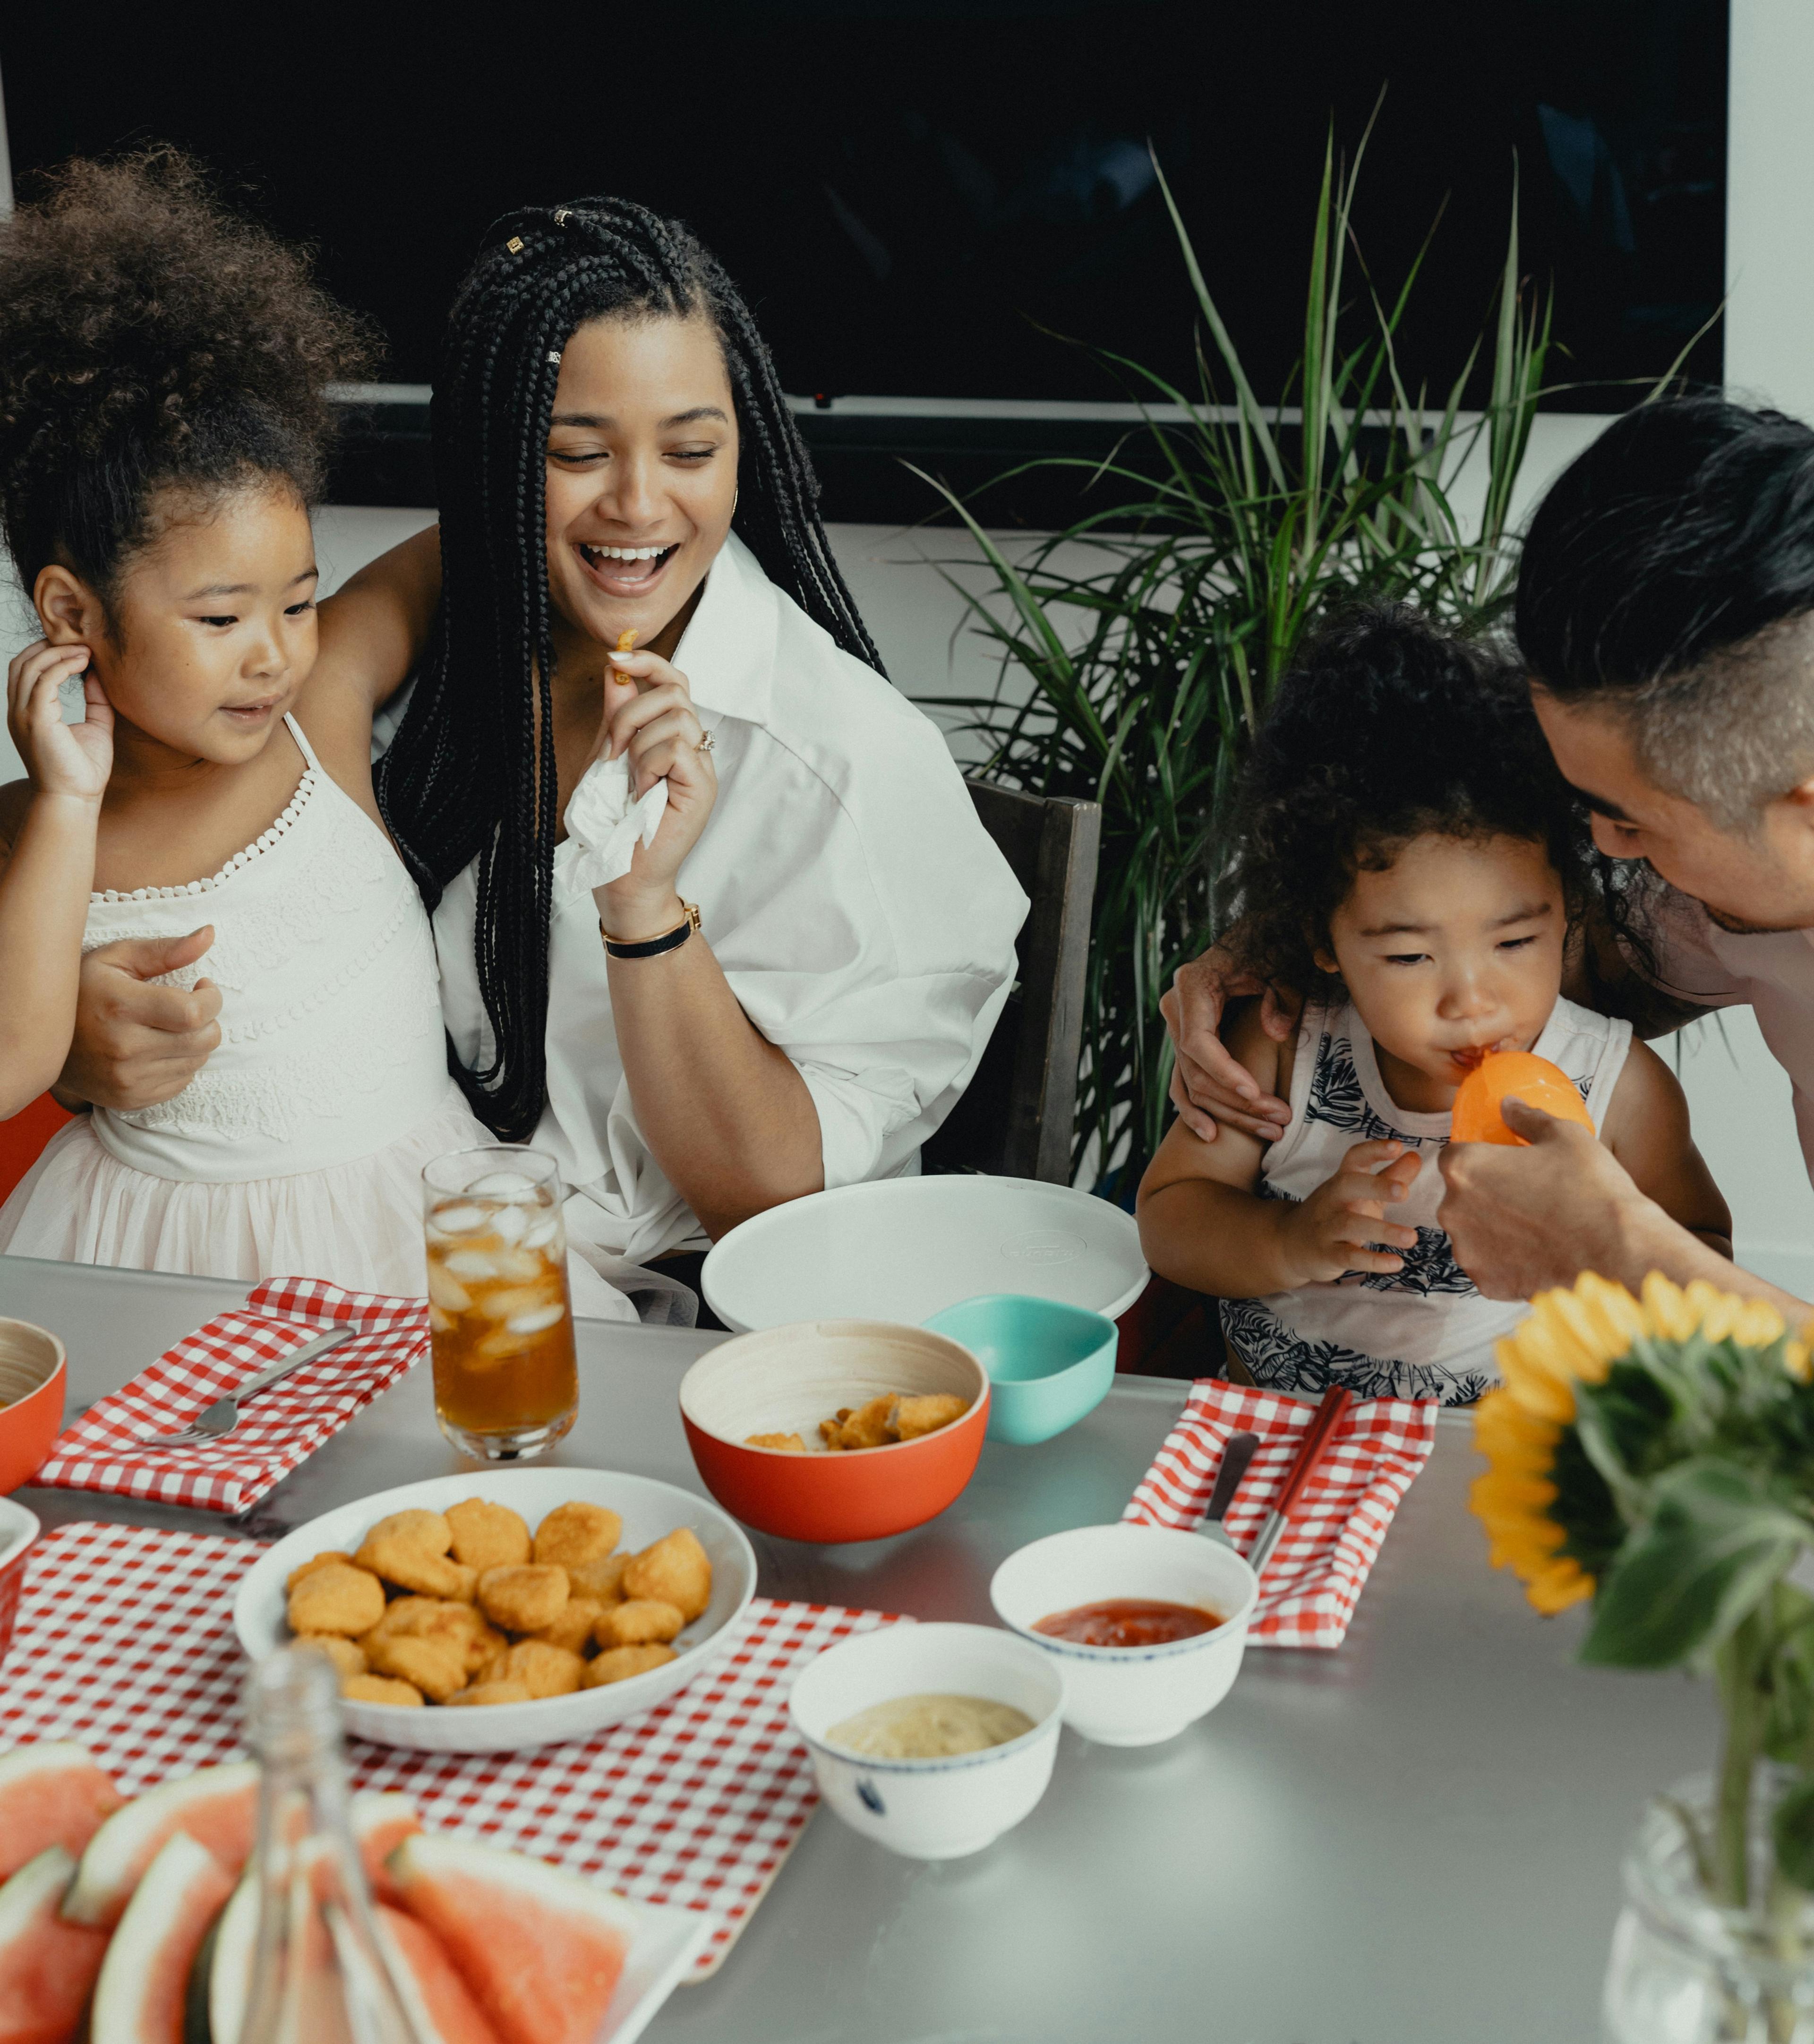 A family with two young daughters sits at a table eating a meal of chicken nuggets